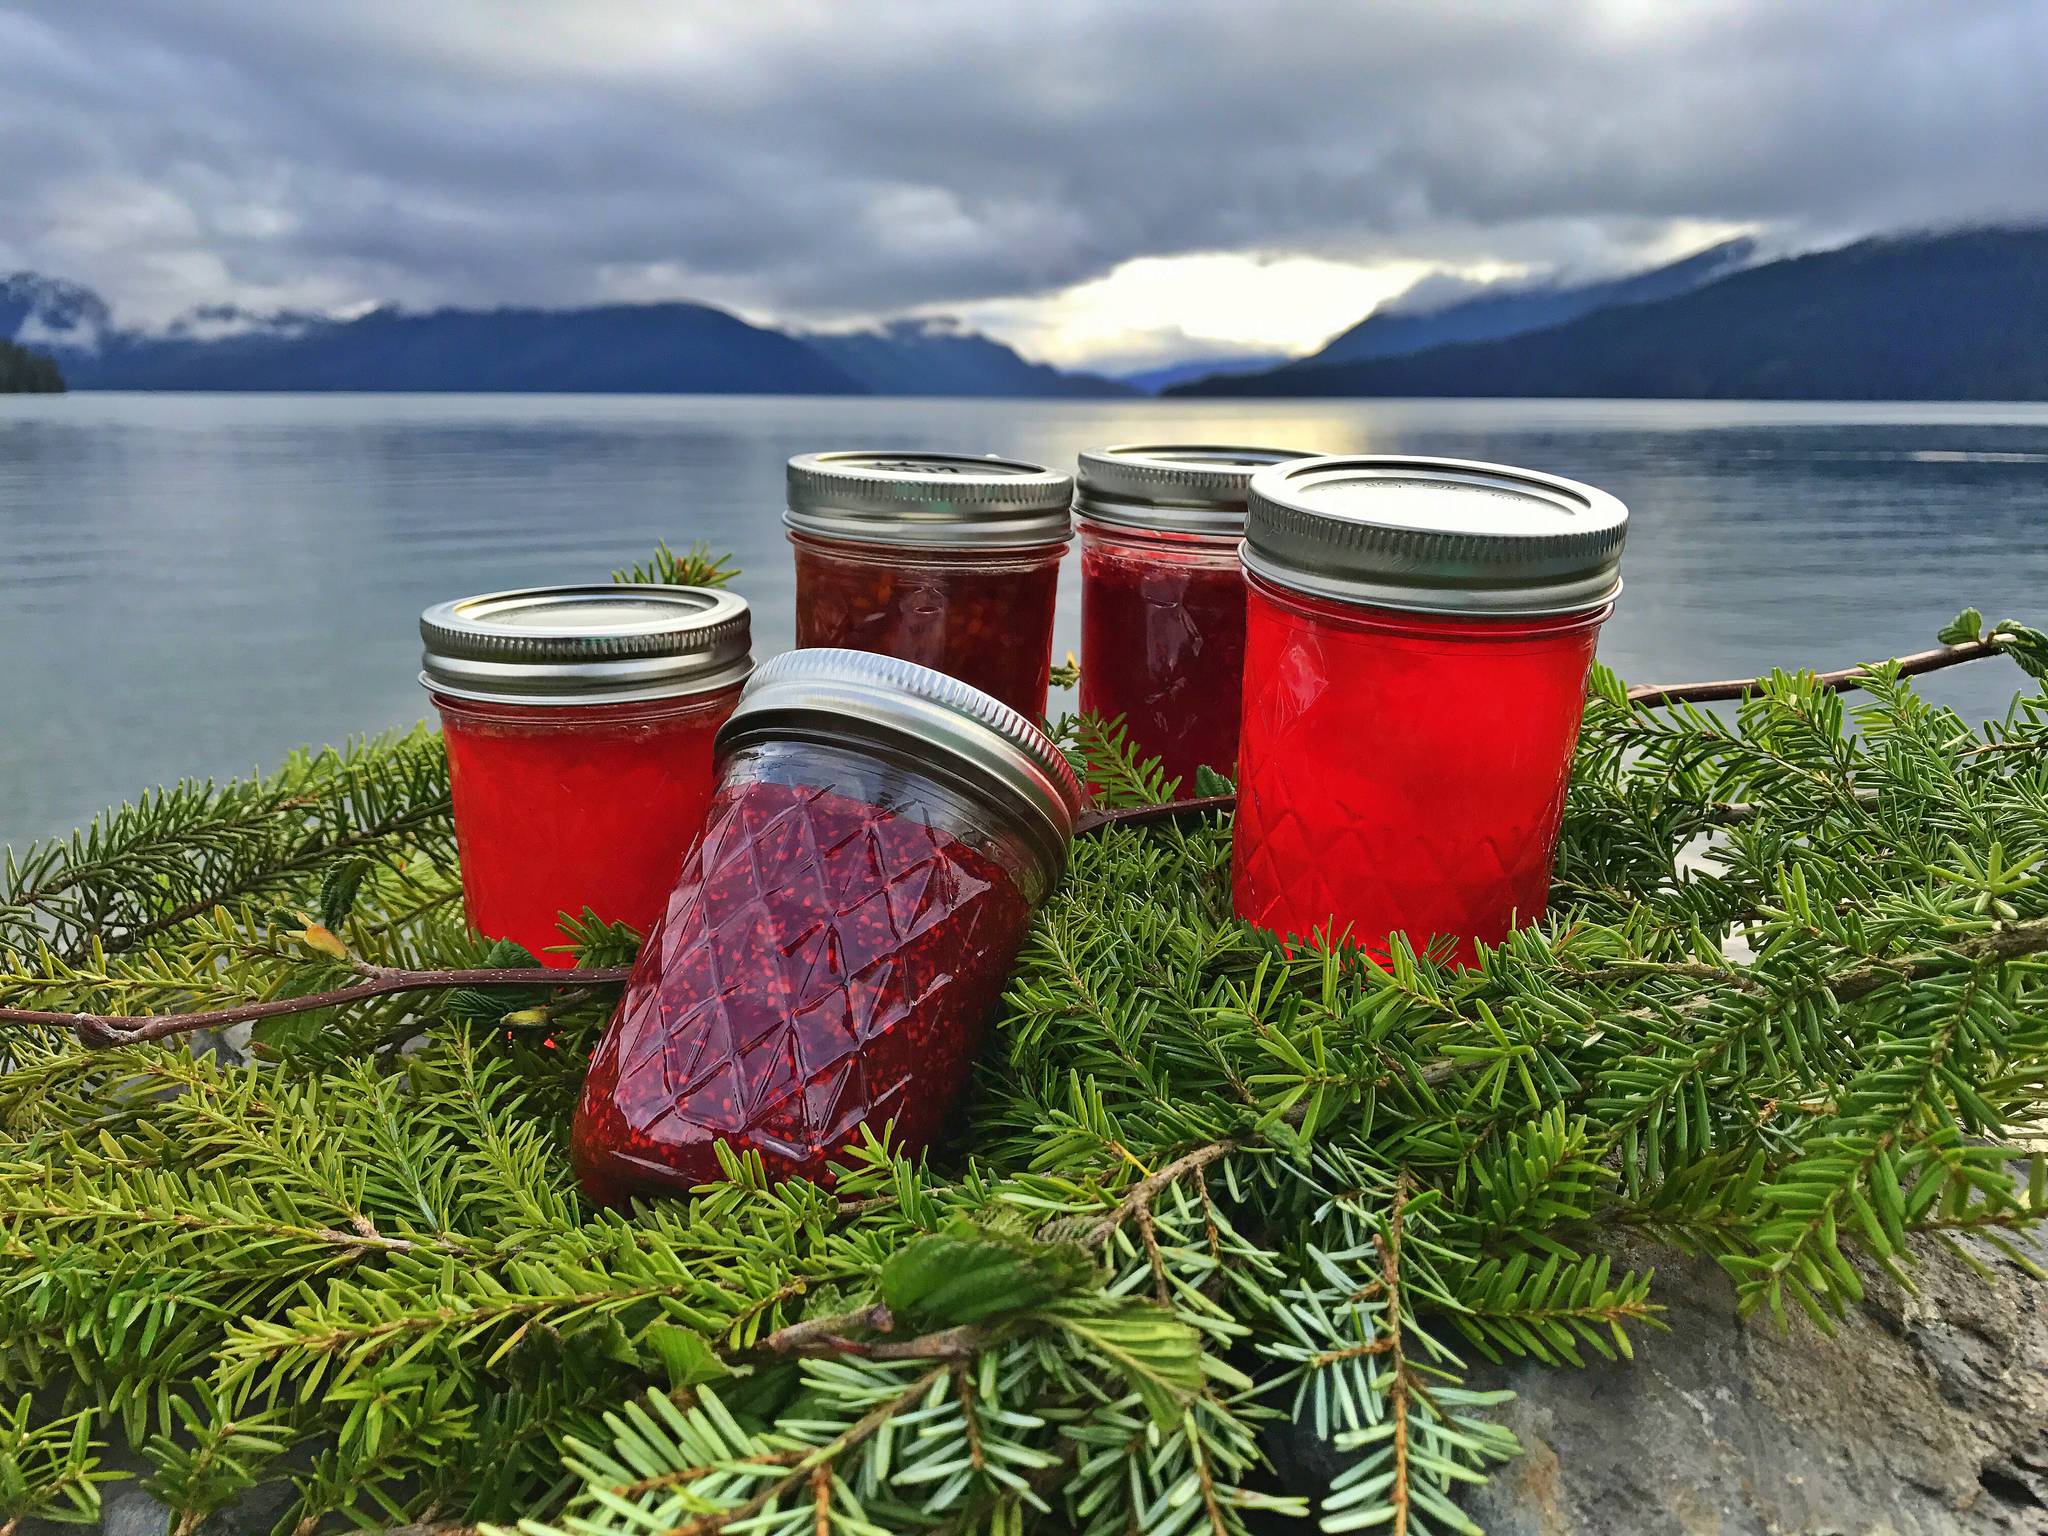 Salmonberry jams and jellies. Vivian Mork Yéilk’ | For the Capital City Weekly